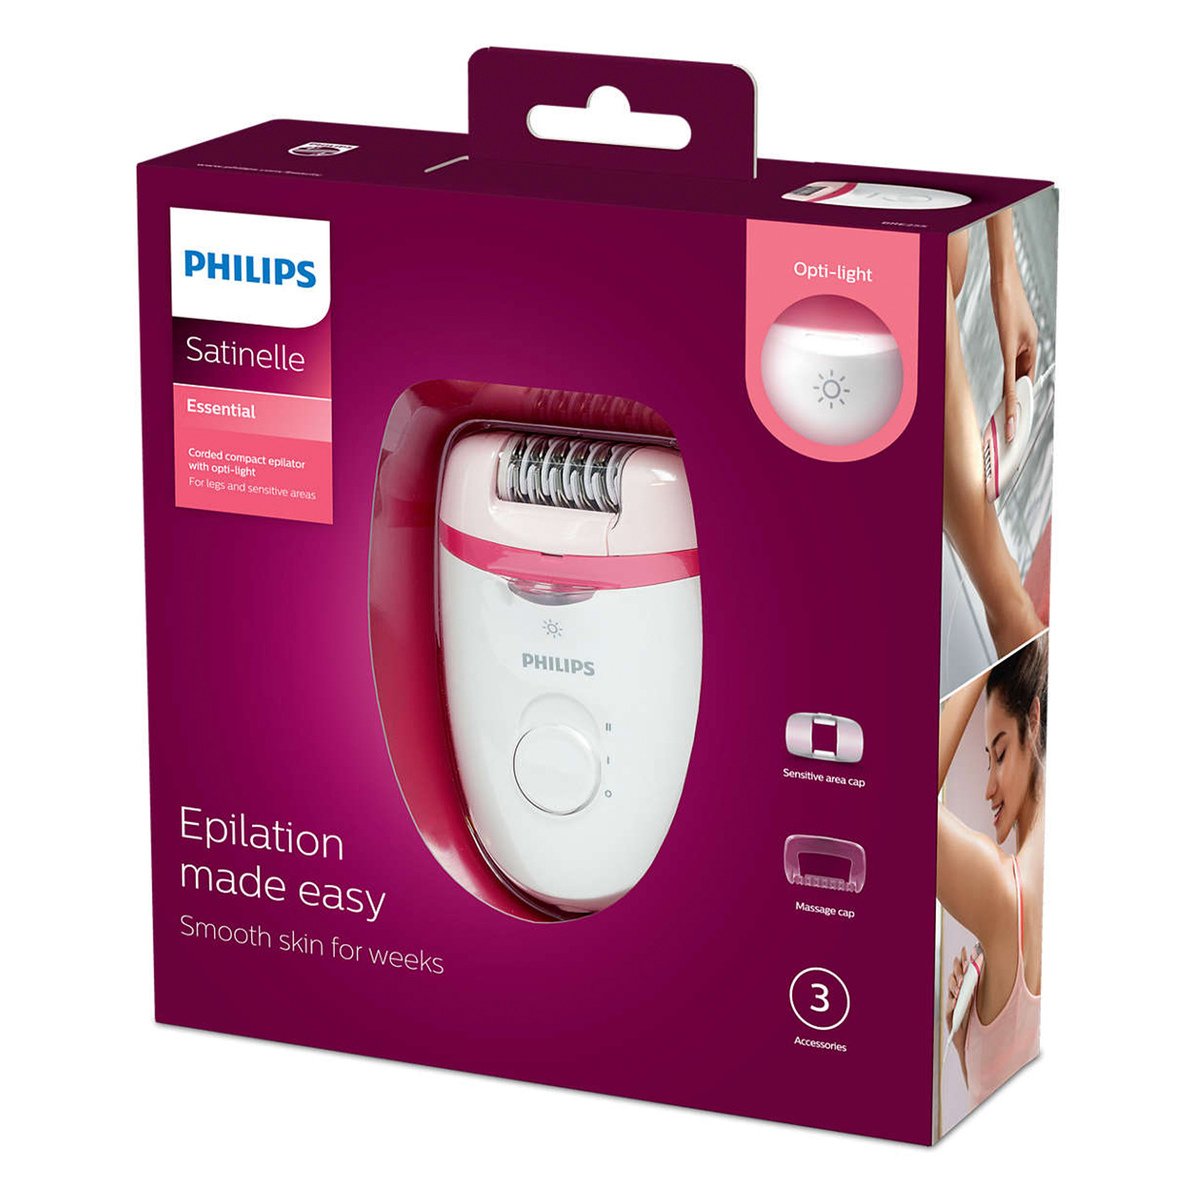 Philips Satinelle Essential Corded Compact Epilator, White, BRE255/00